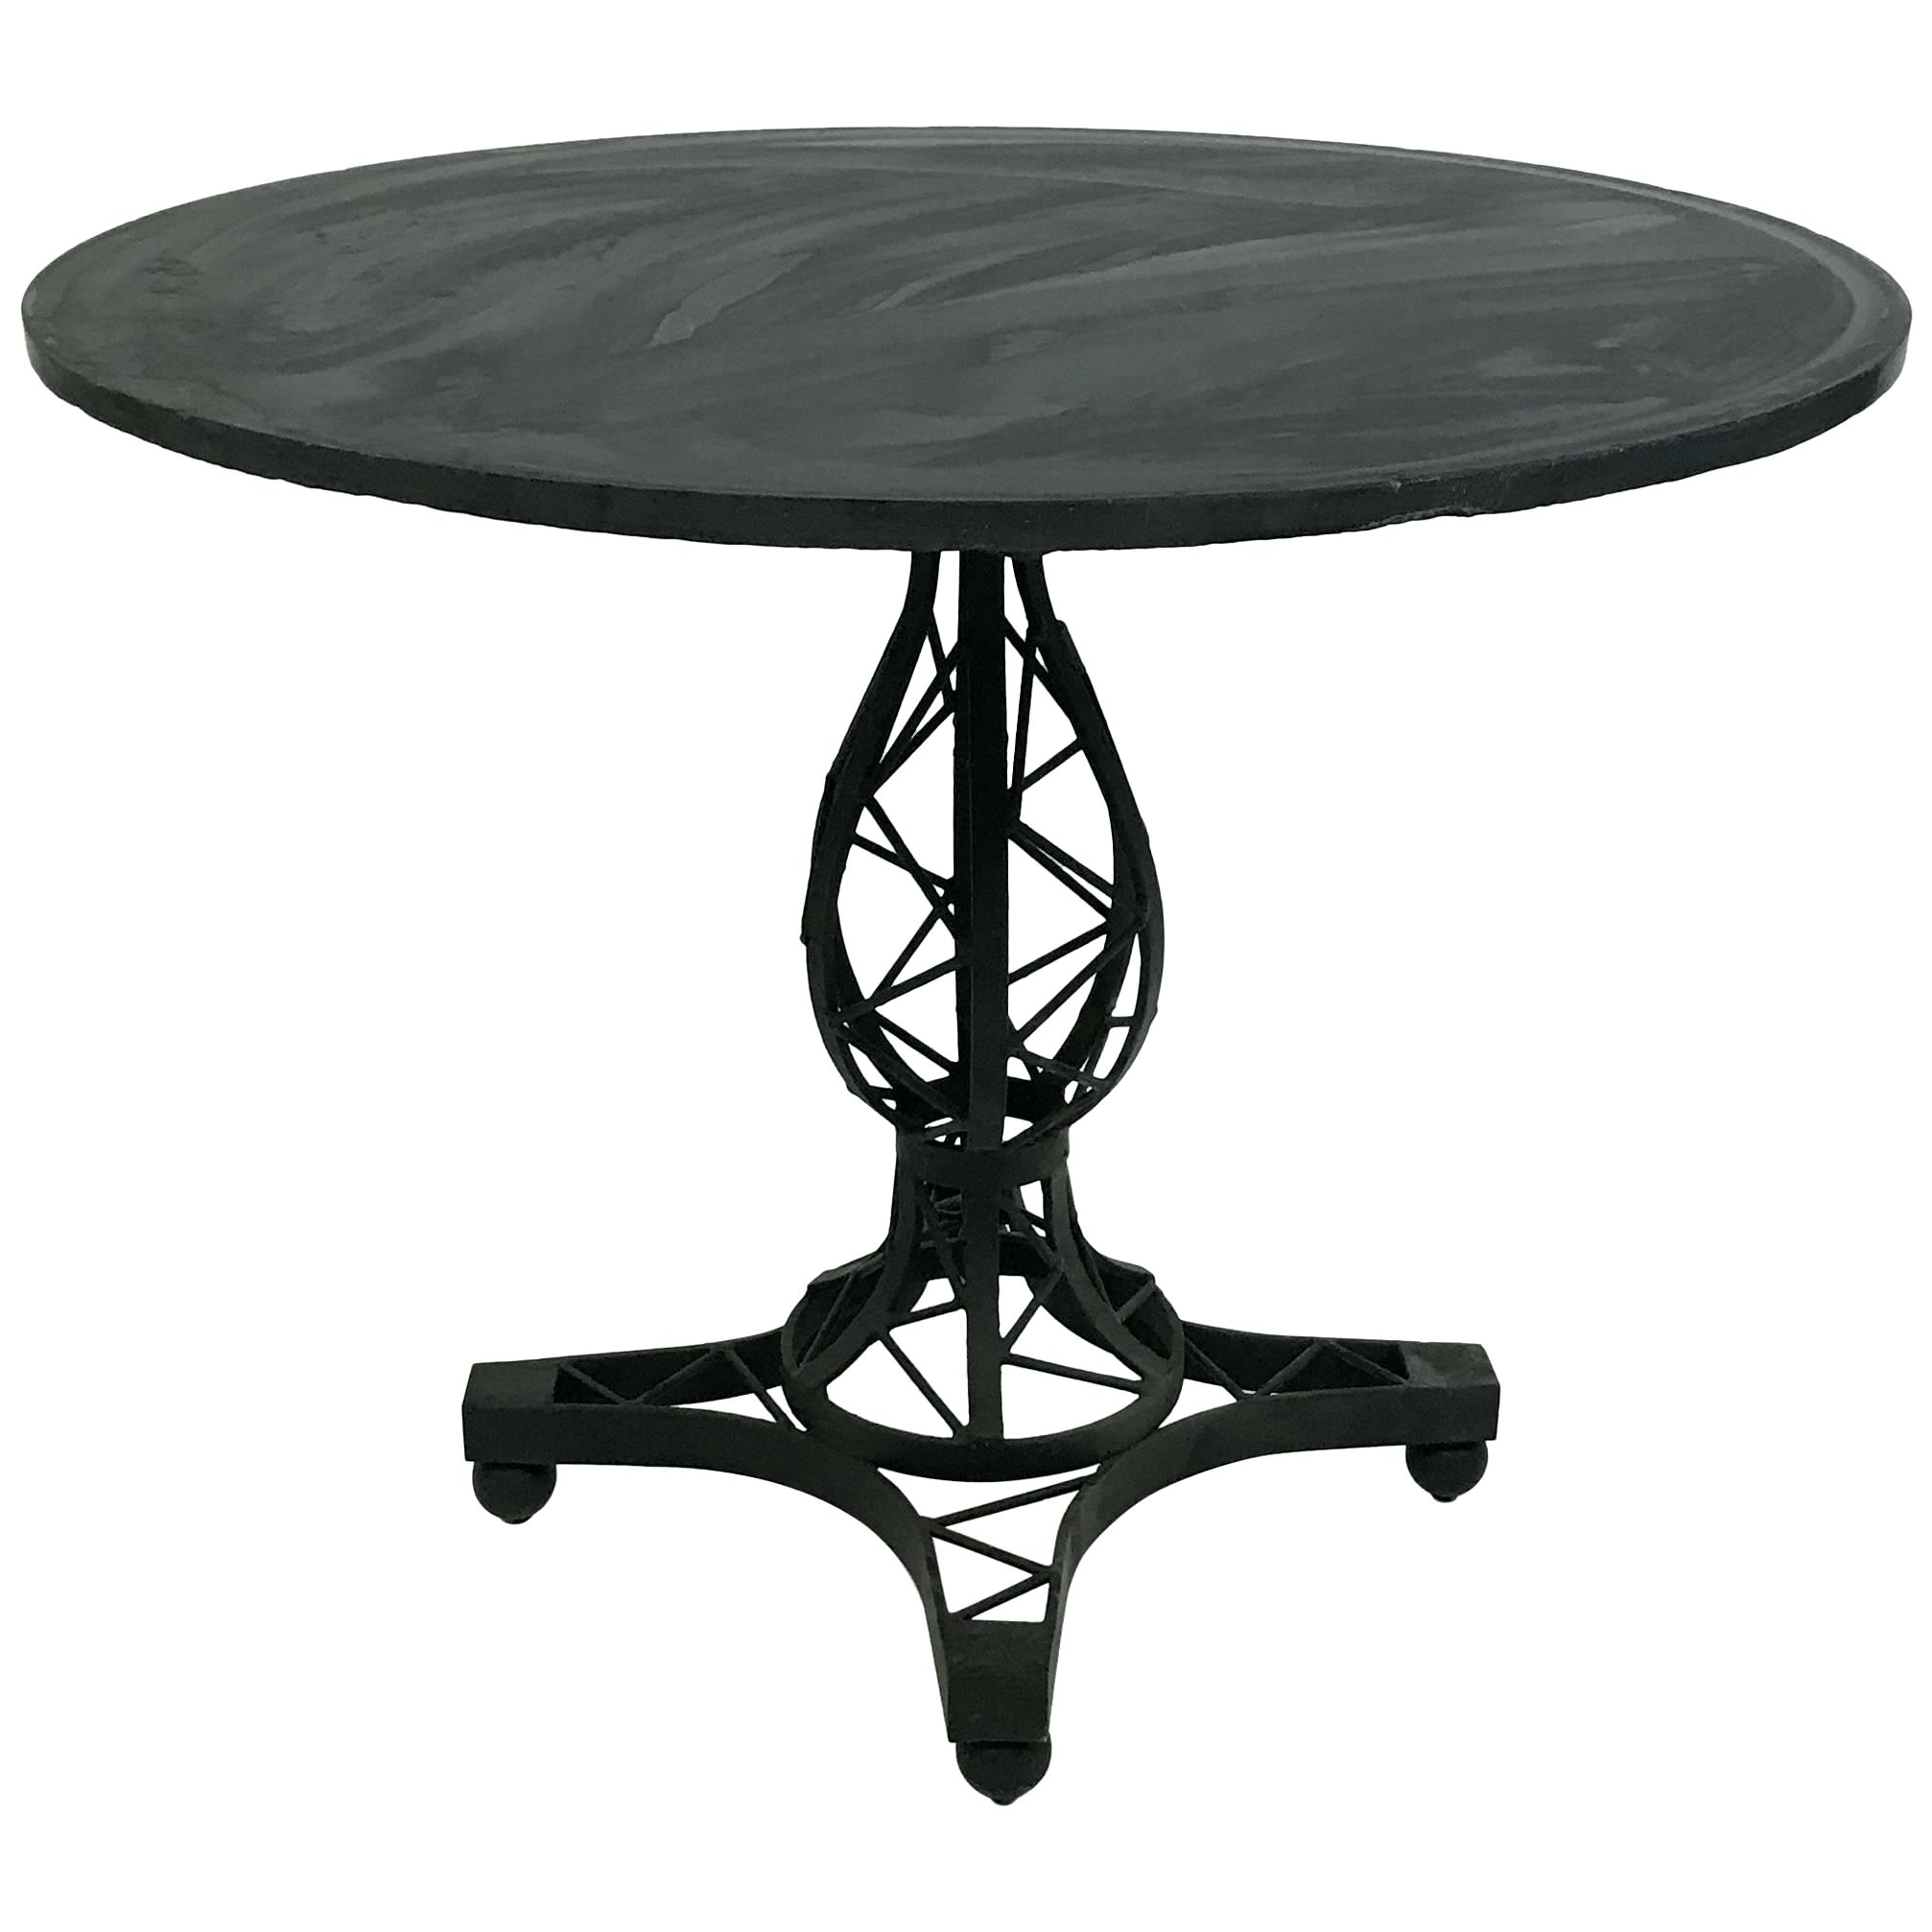 black pedestal table antique cast iron bases slate and wrought round dining accent target white bedside toledo furniture new coffee floor cabinet red chest turquoise lamp pier one